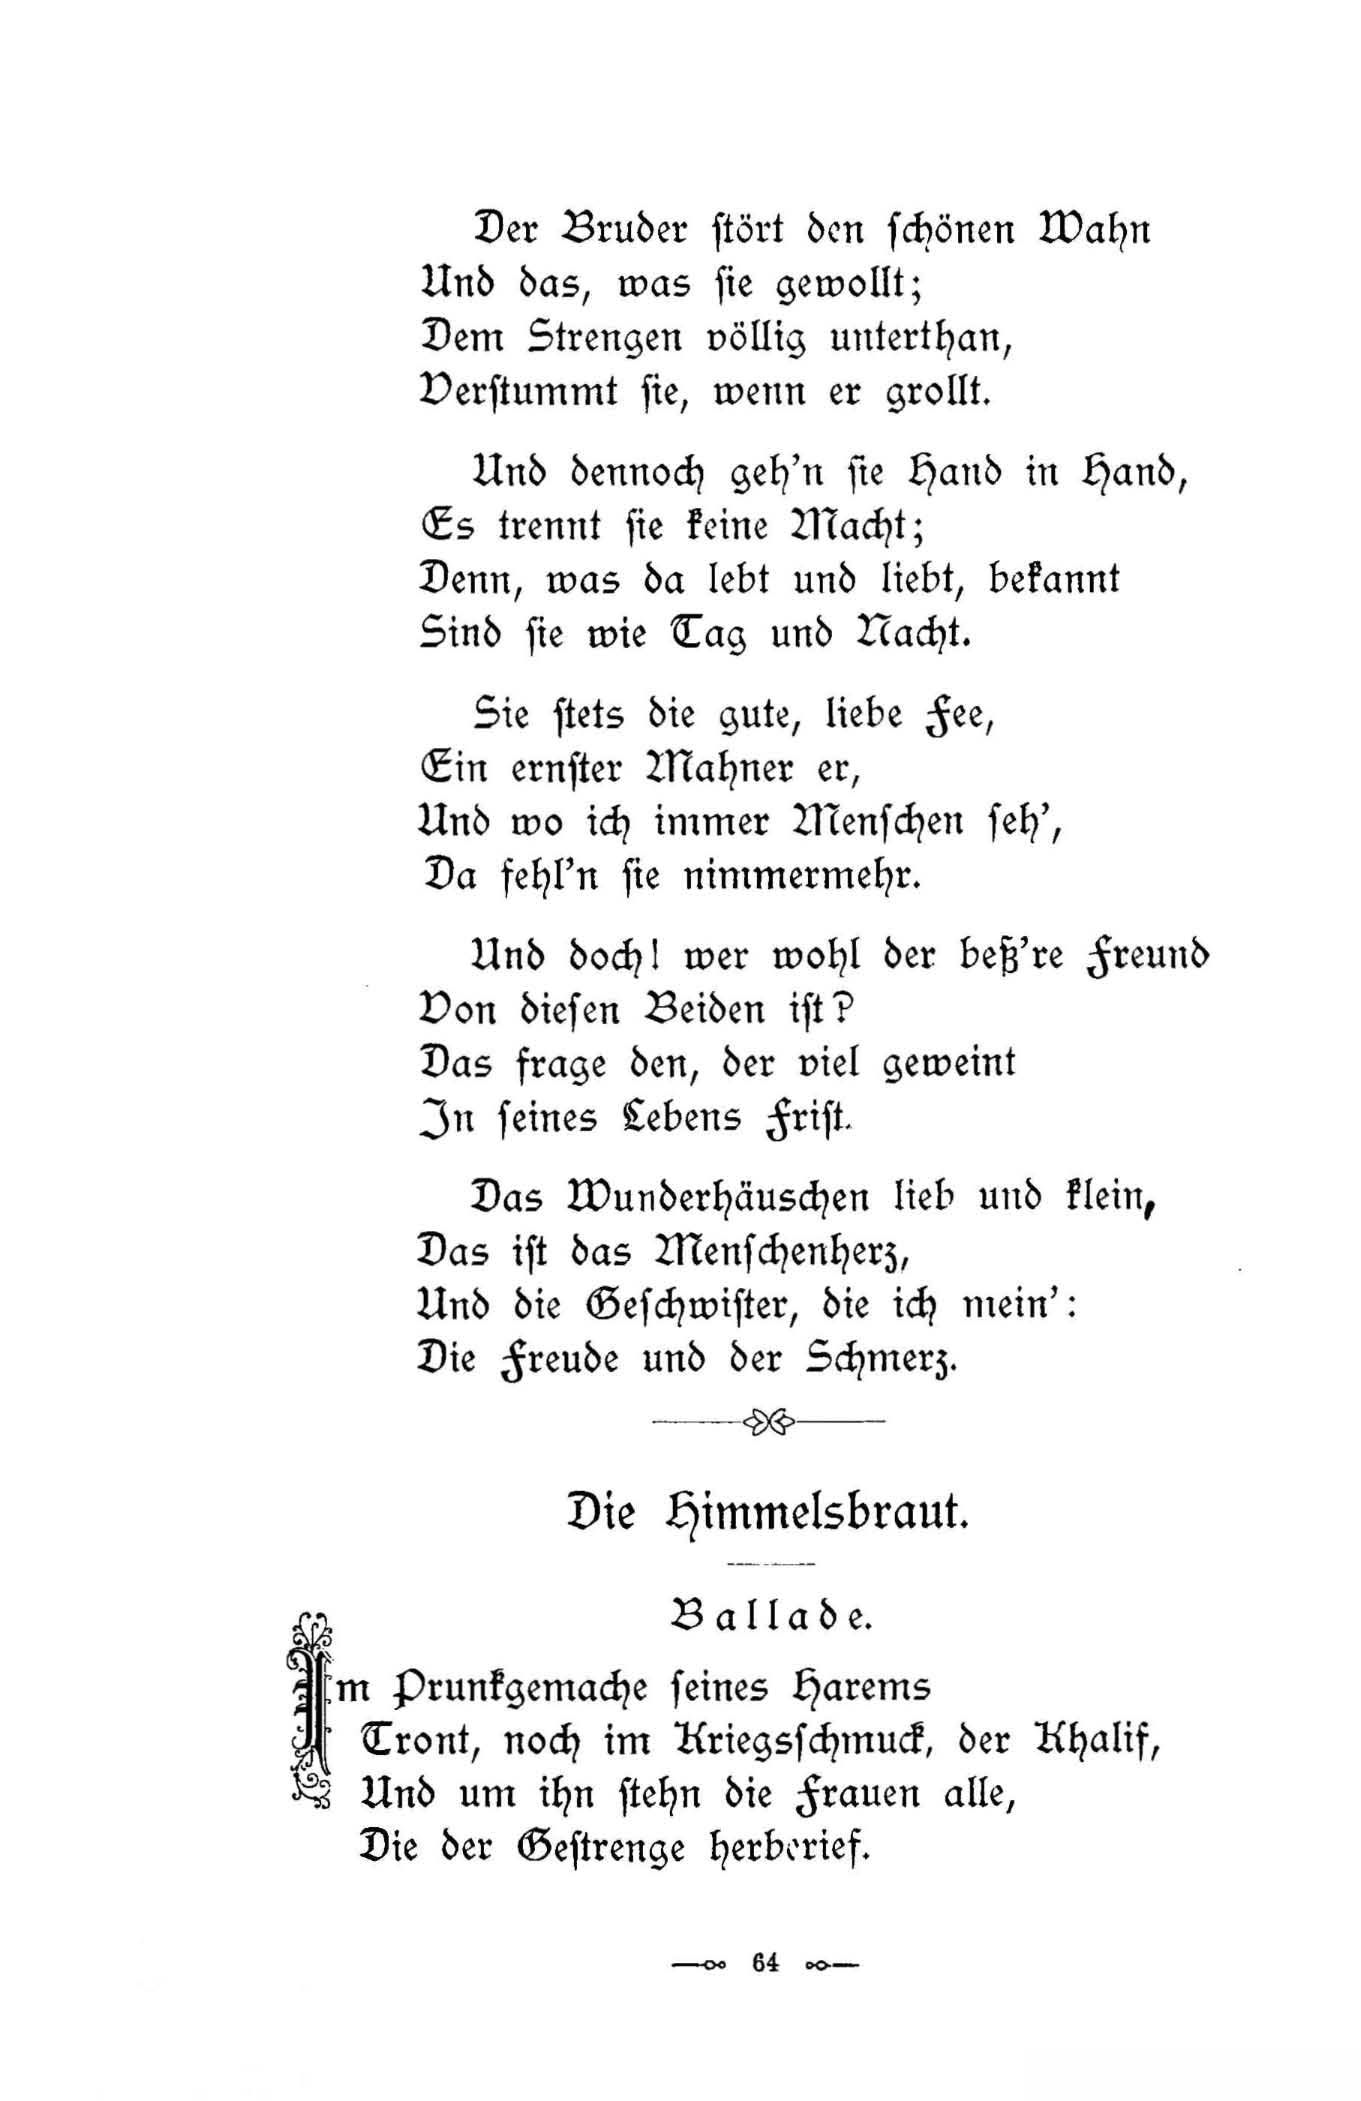 Die Himmelsbraut (1896) | 1. (64) Main body of text